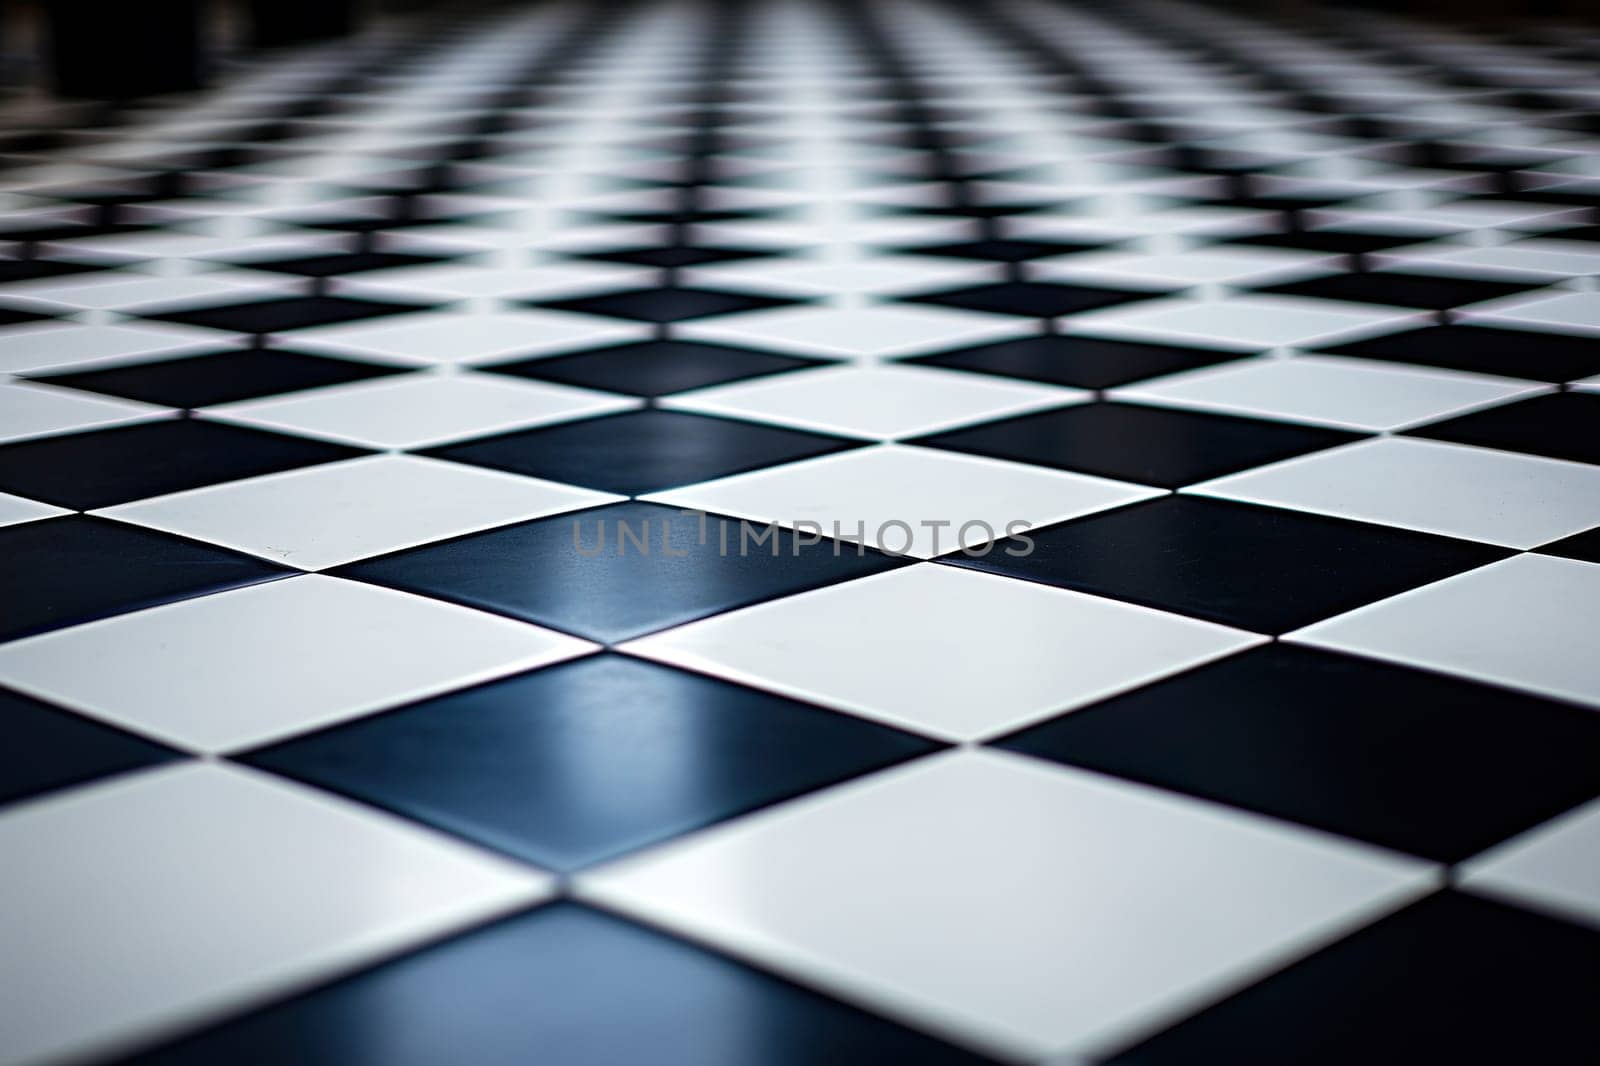 Checkerboard marble floor. The floor has a black and white diamond pattern.